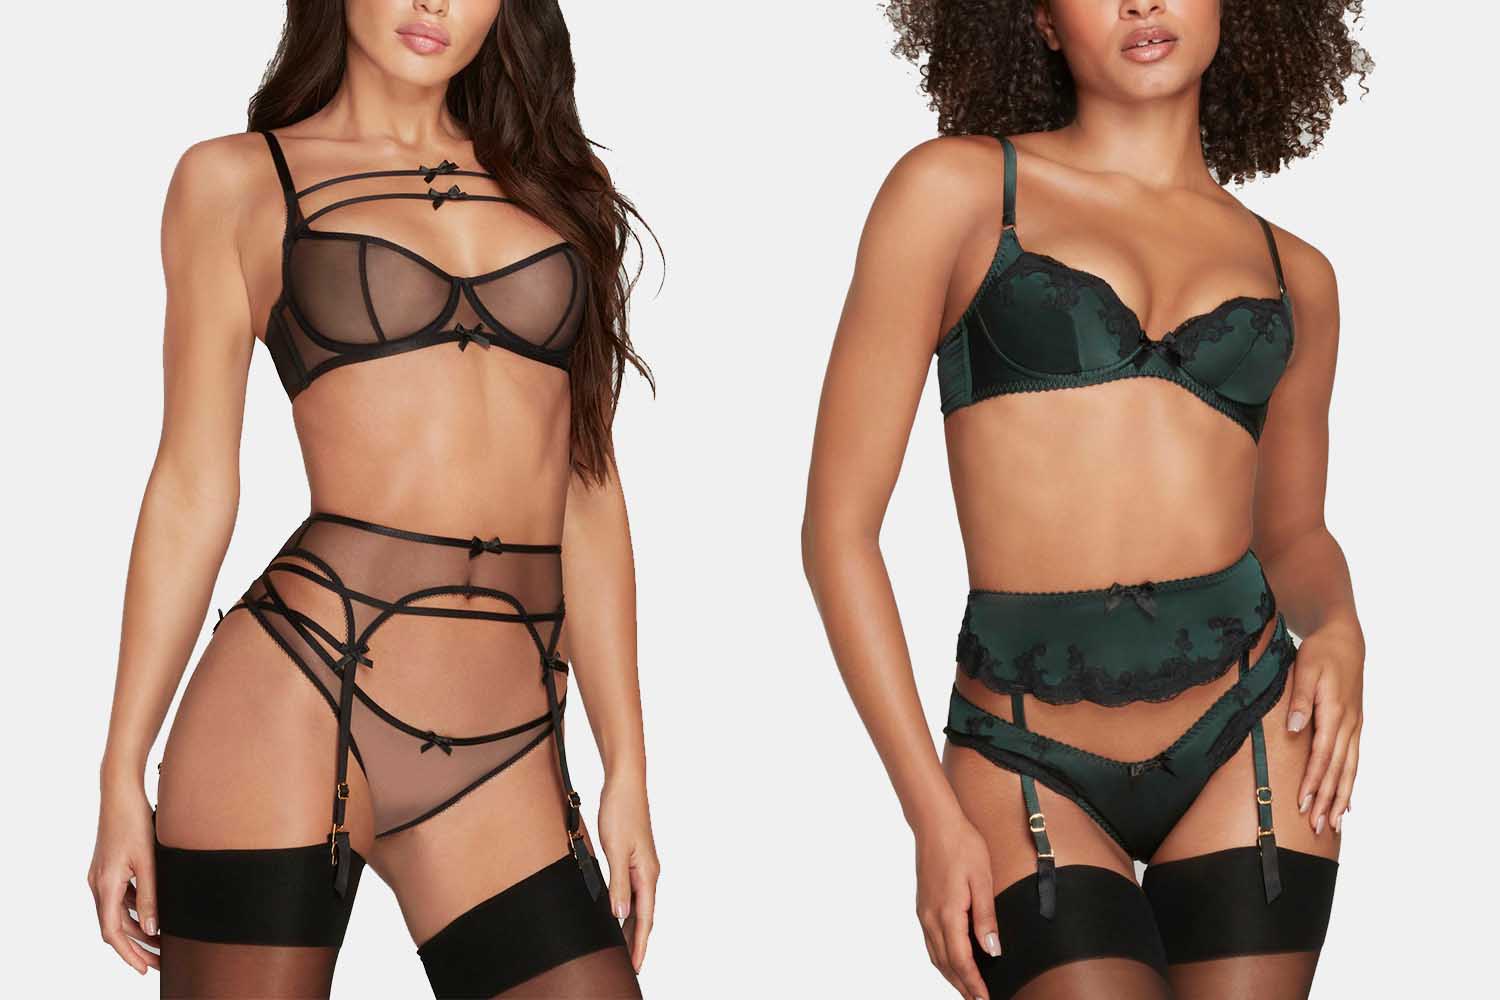 20 Best Lingerie Brands - Best Stores for Intimate Apparel